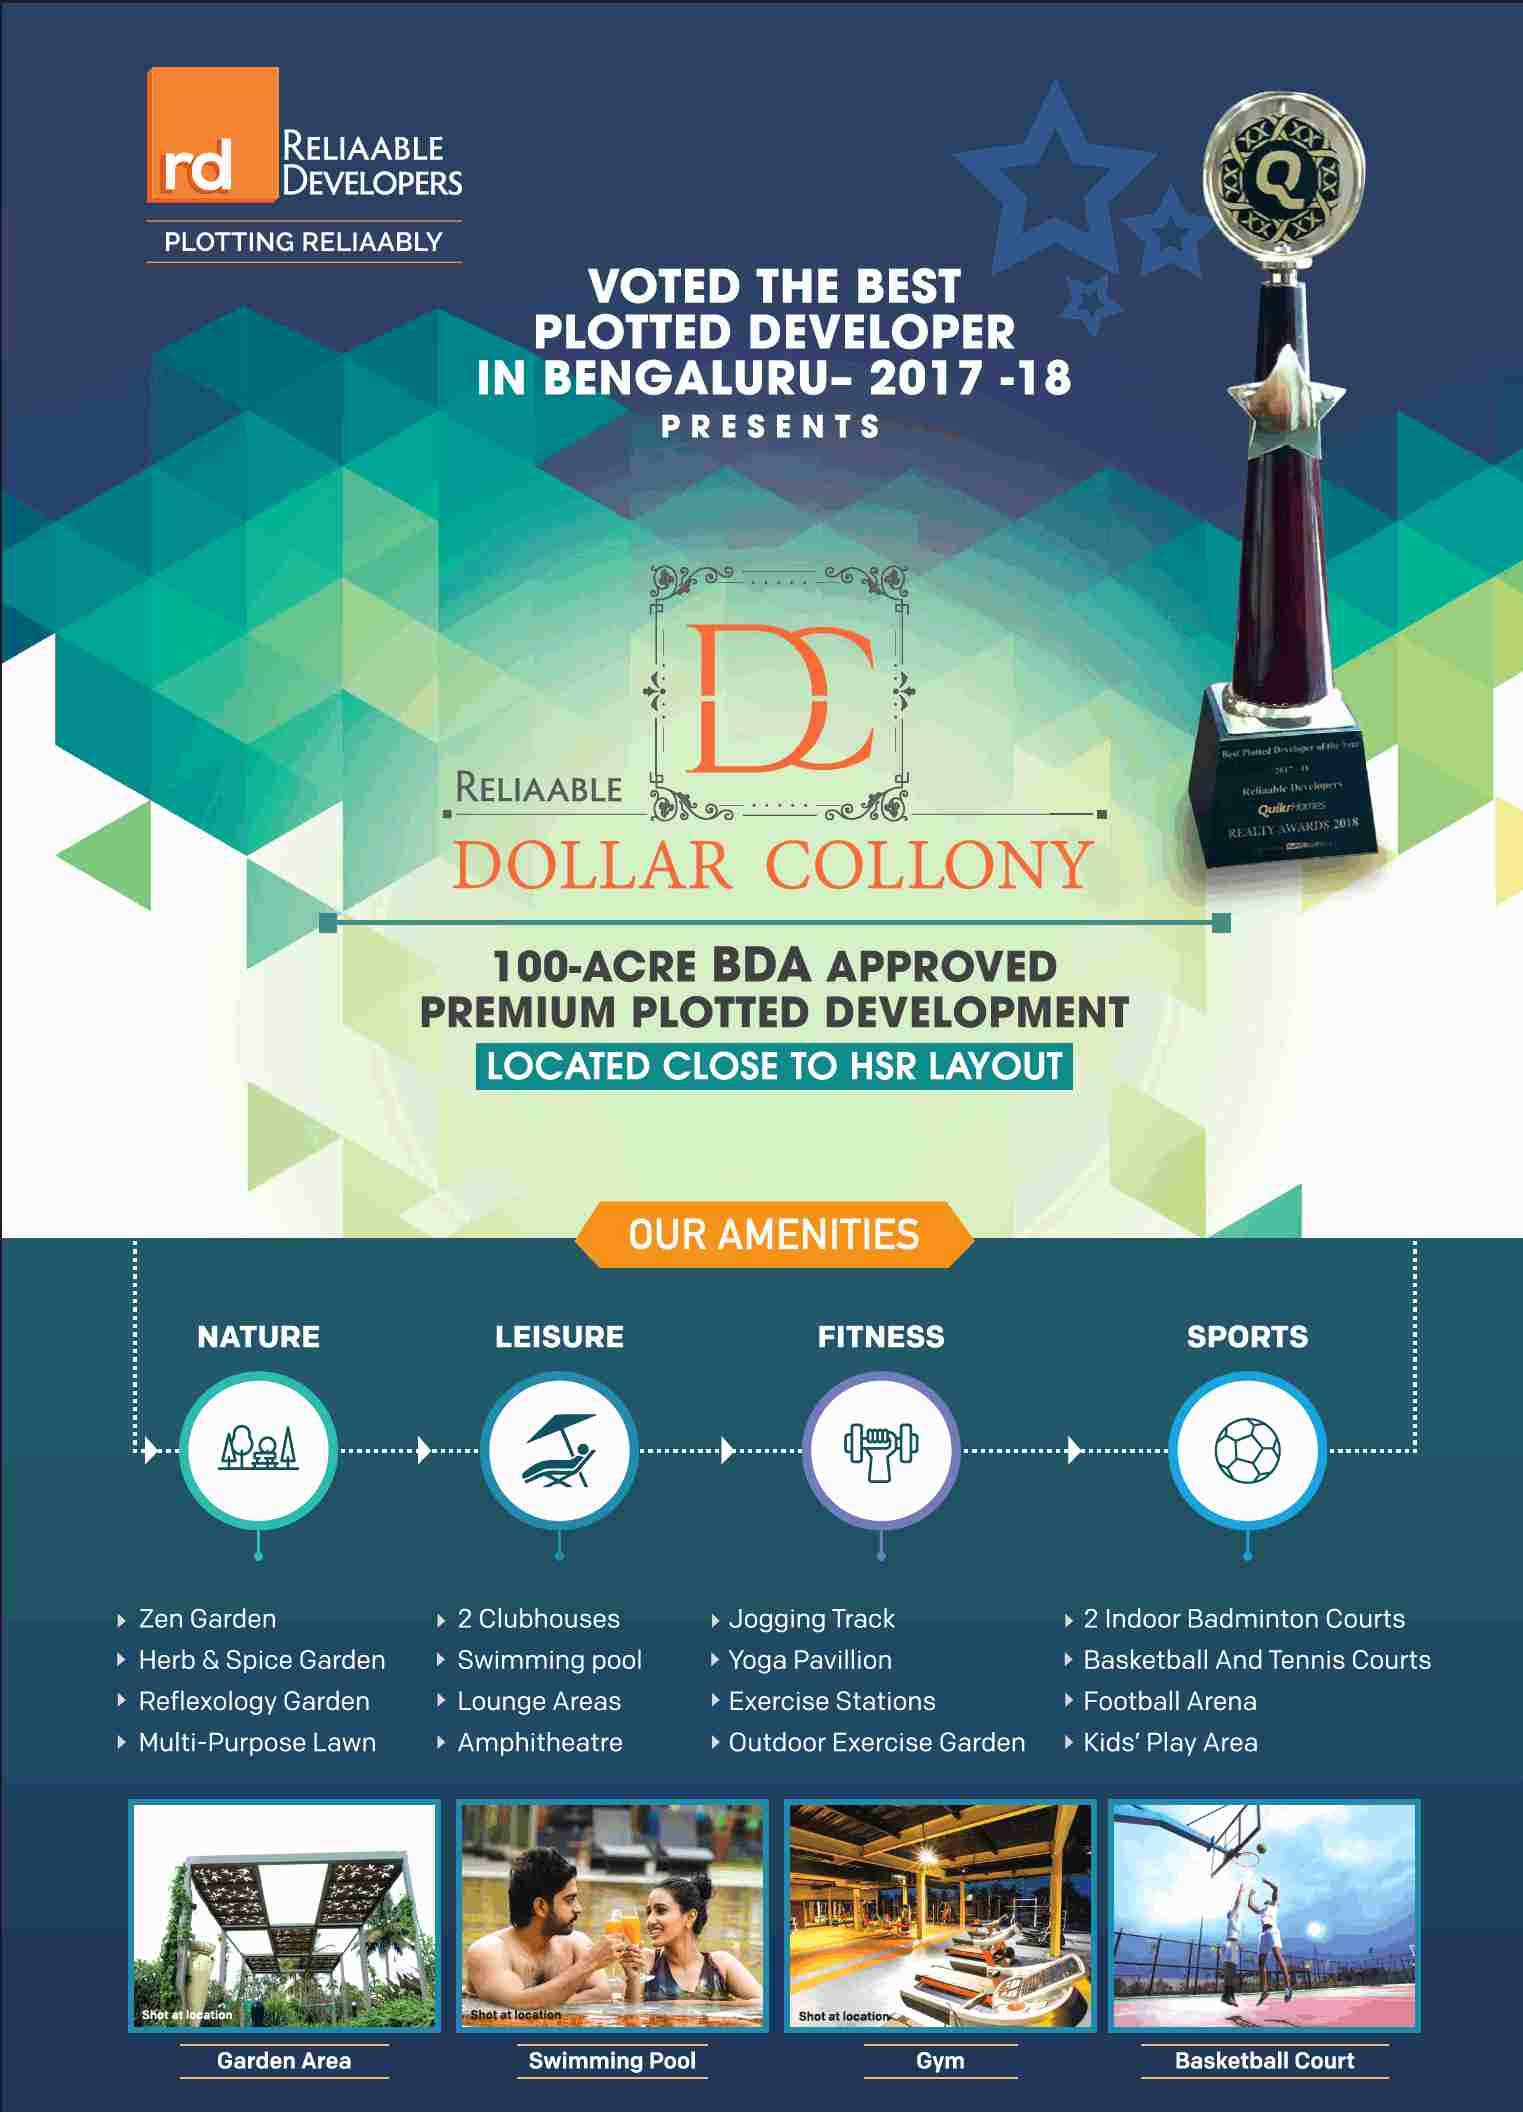 Reside in premium plotted development at Reliaable Dollar Collony in Bangalore Update